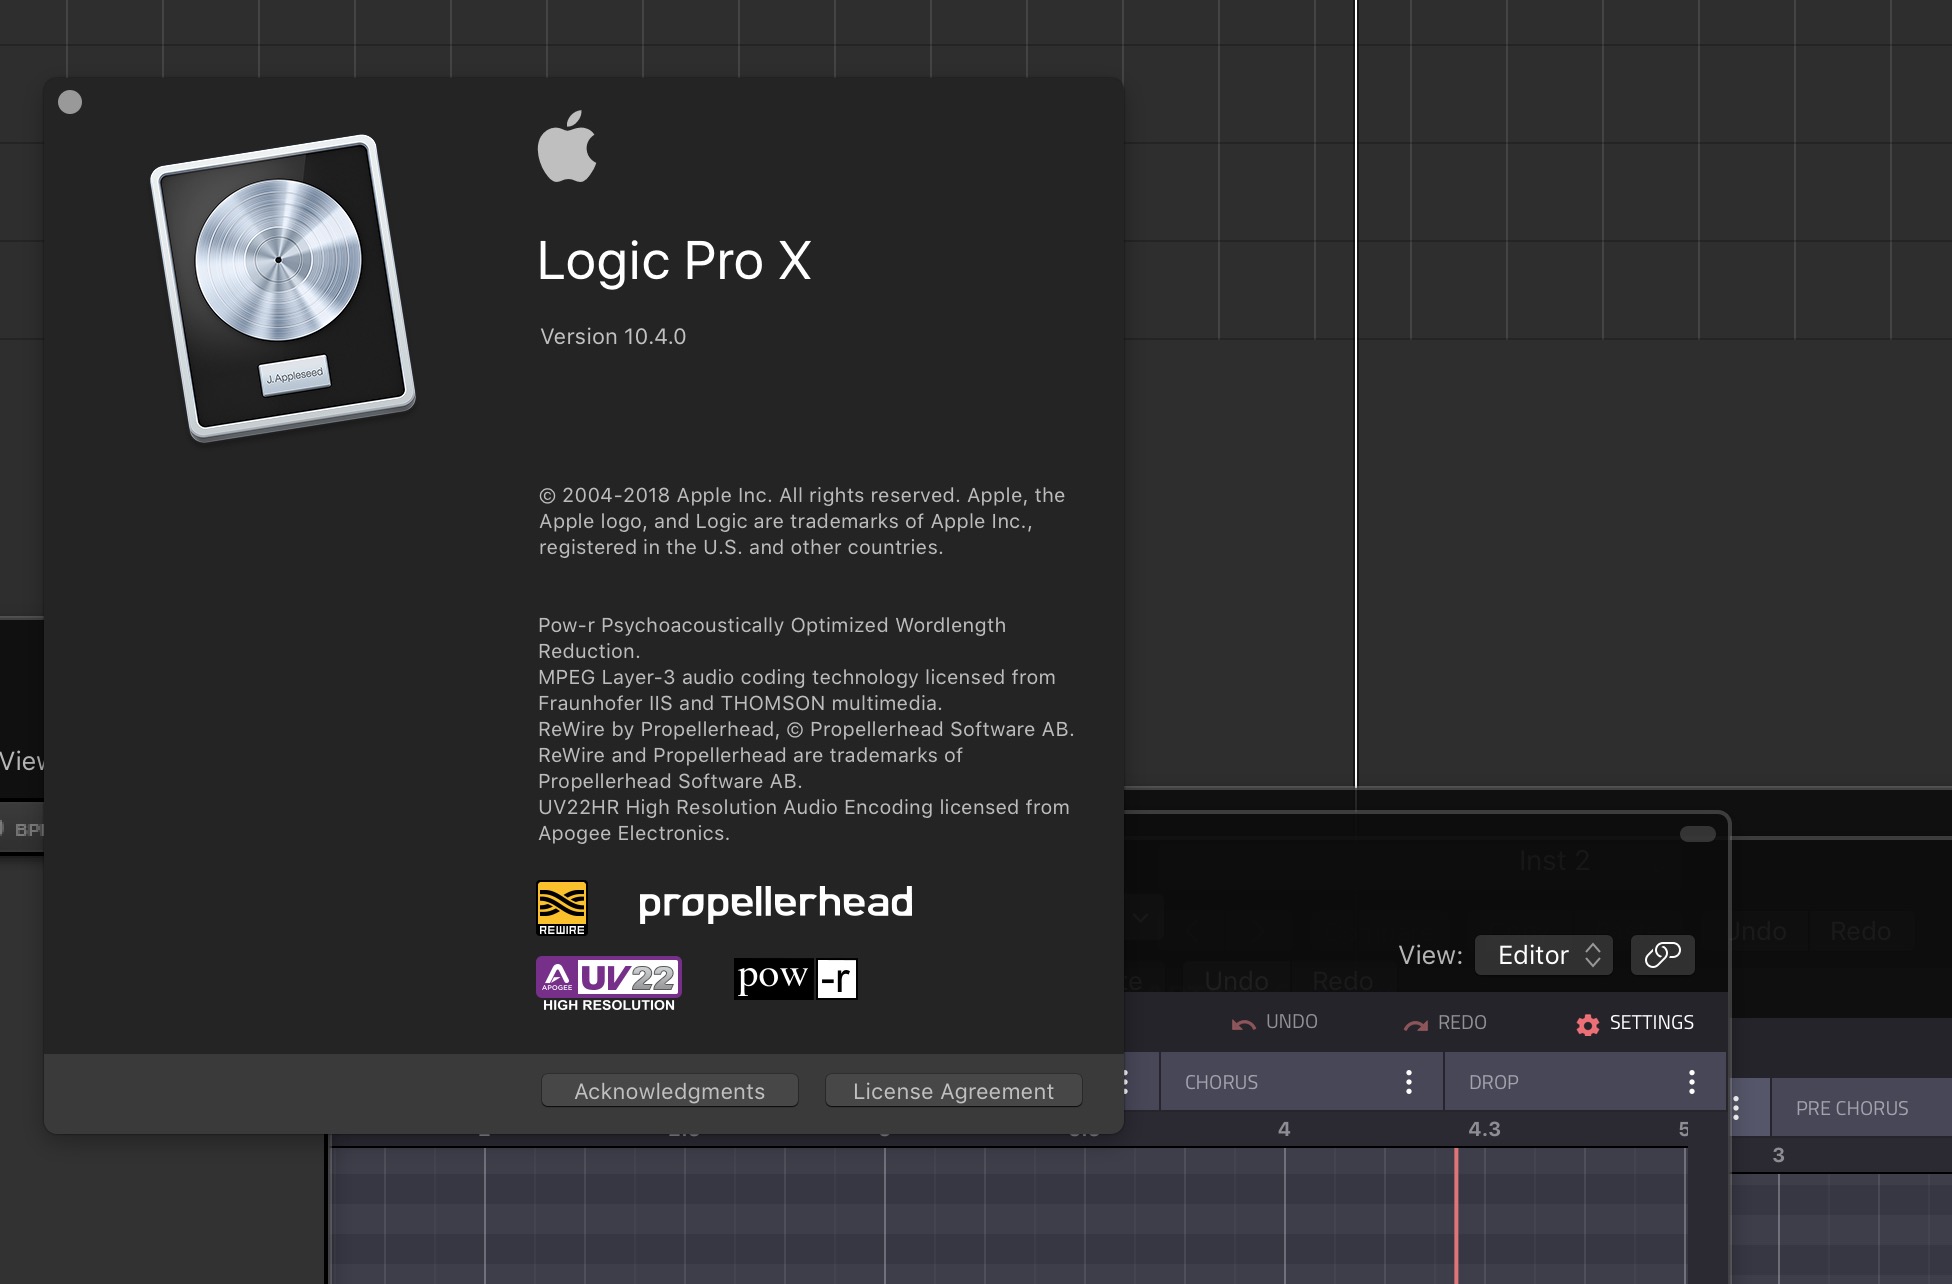 Logic Pro X 10.4 – What’s New – Highlights